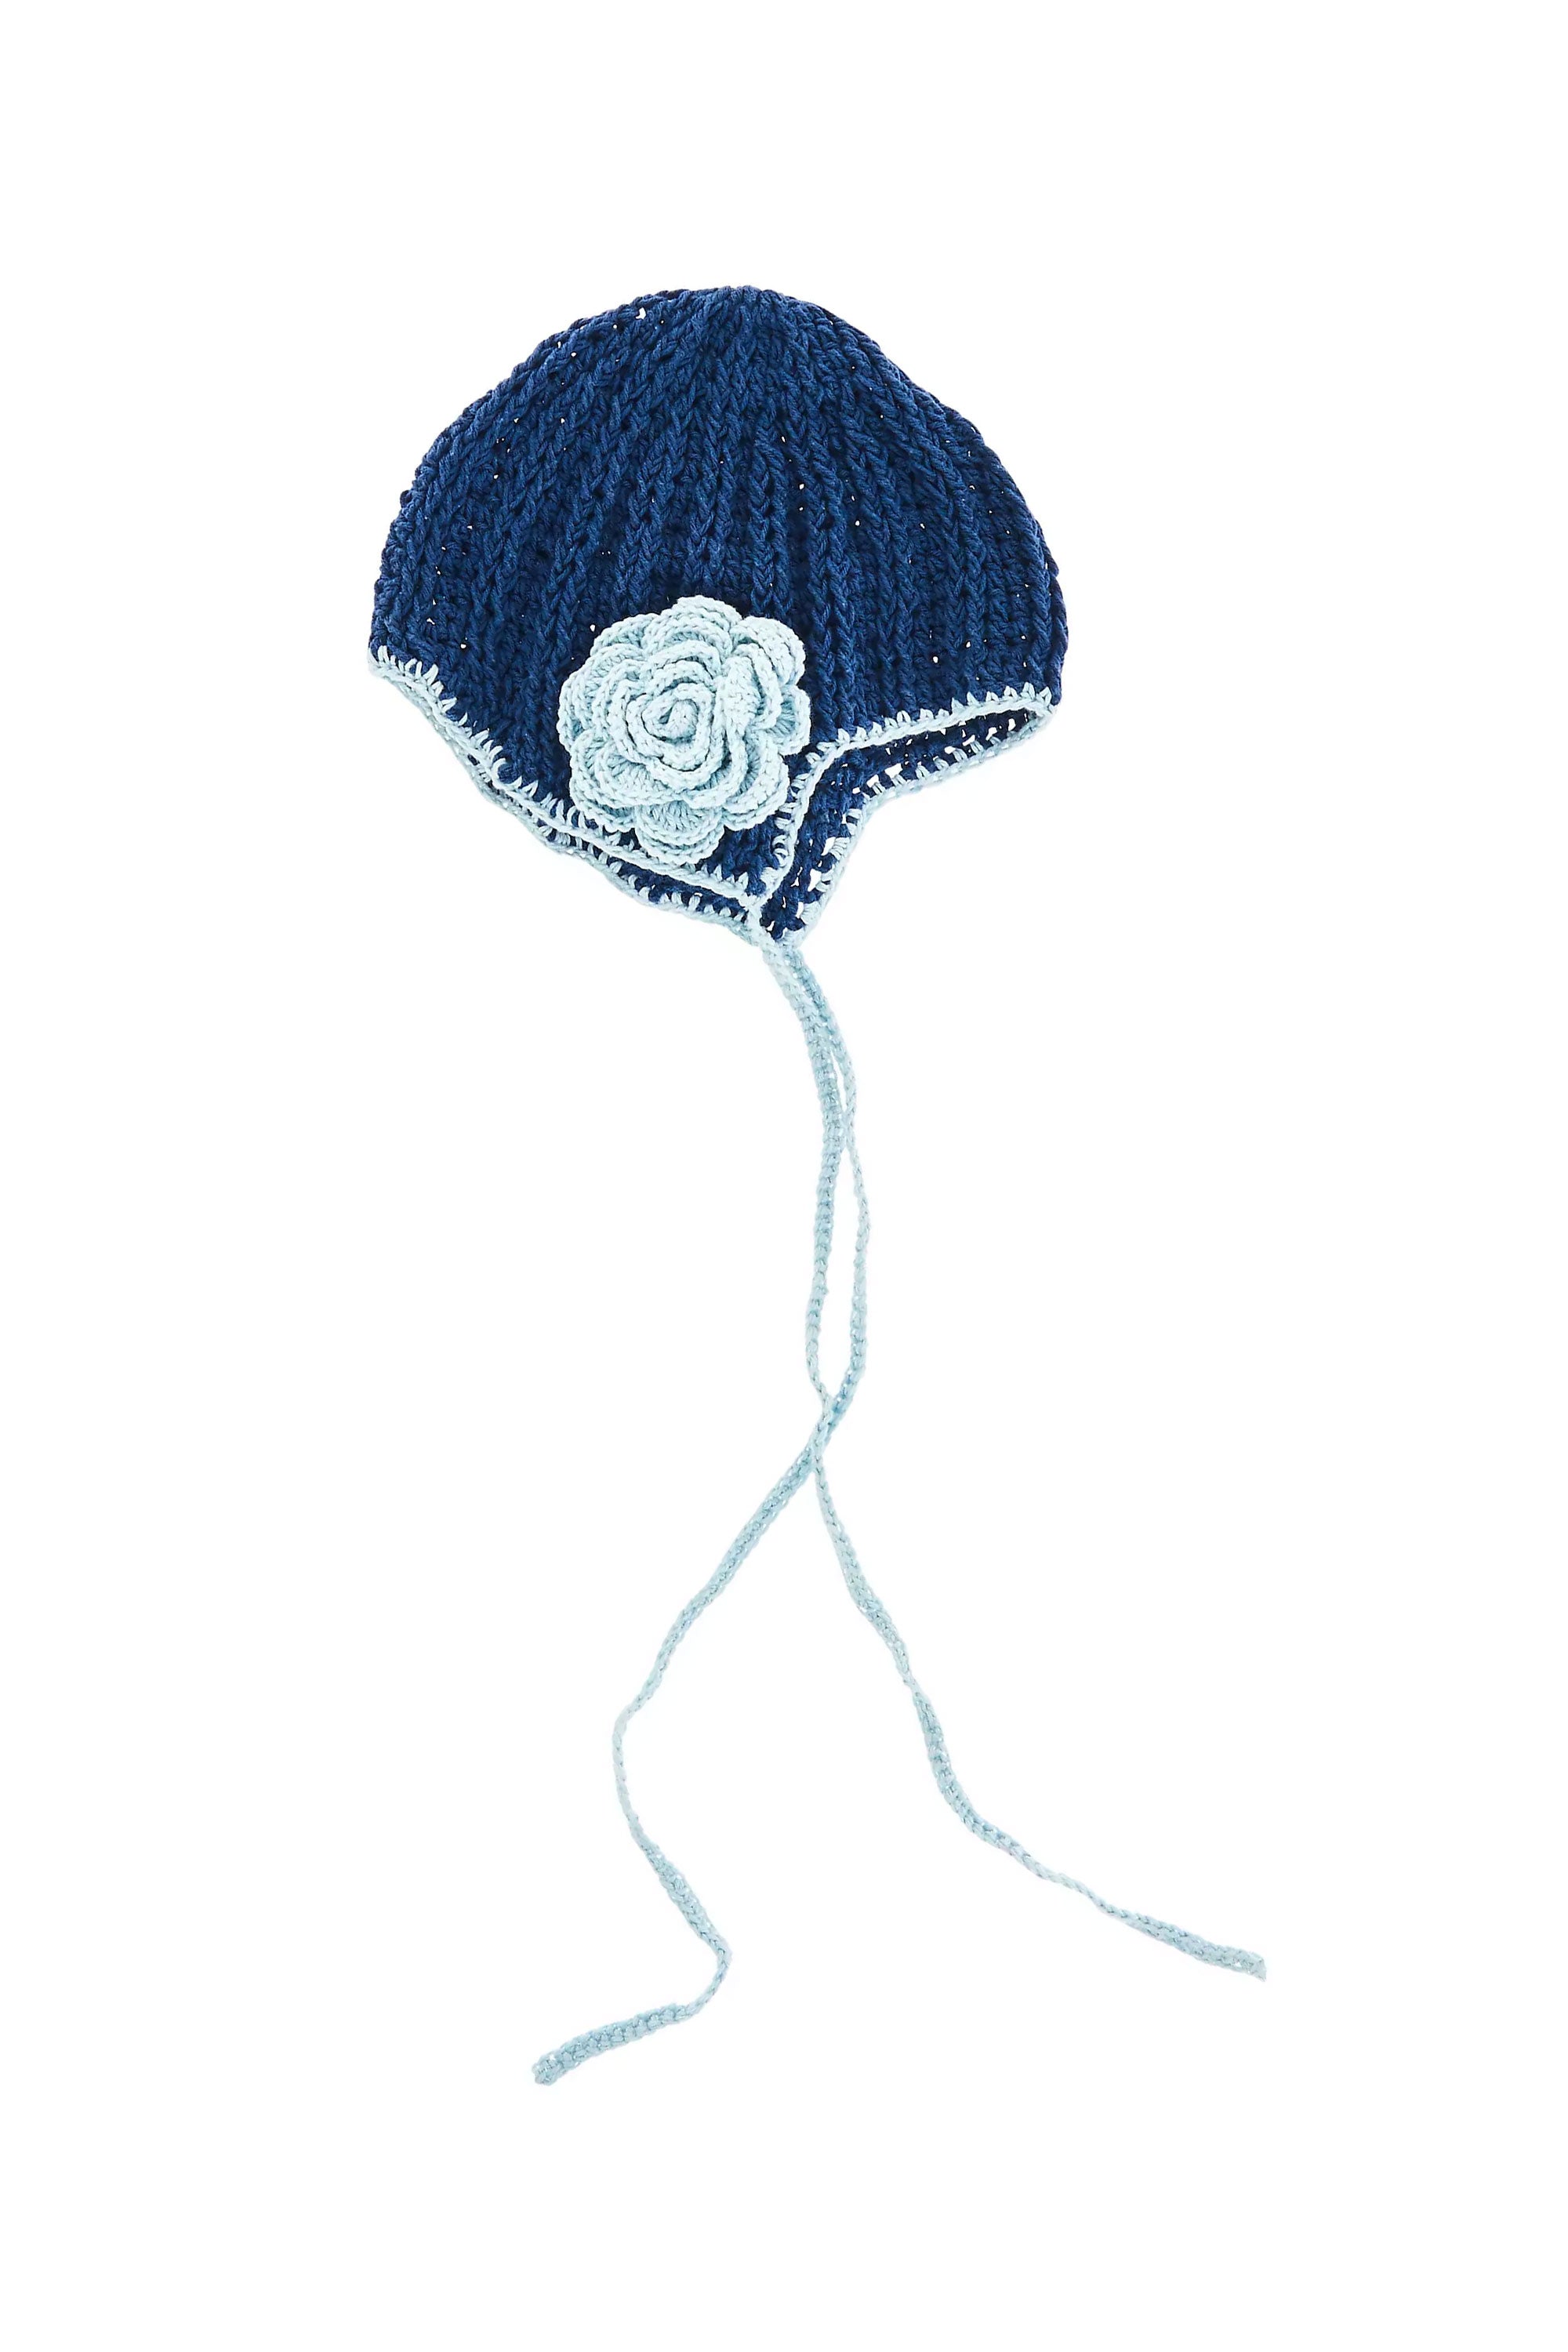 The HEAVEN - ANNA SUI CROCHET BEANIE  available online with global shipping, and in PAM Stores Melbourne and Sydney.